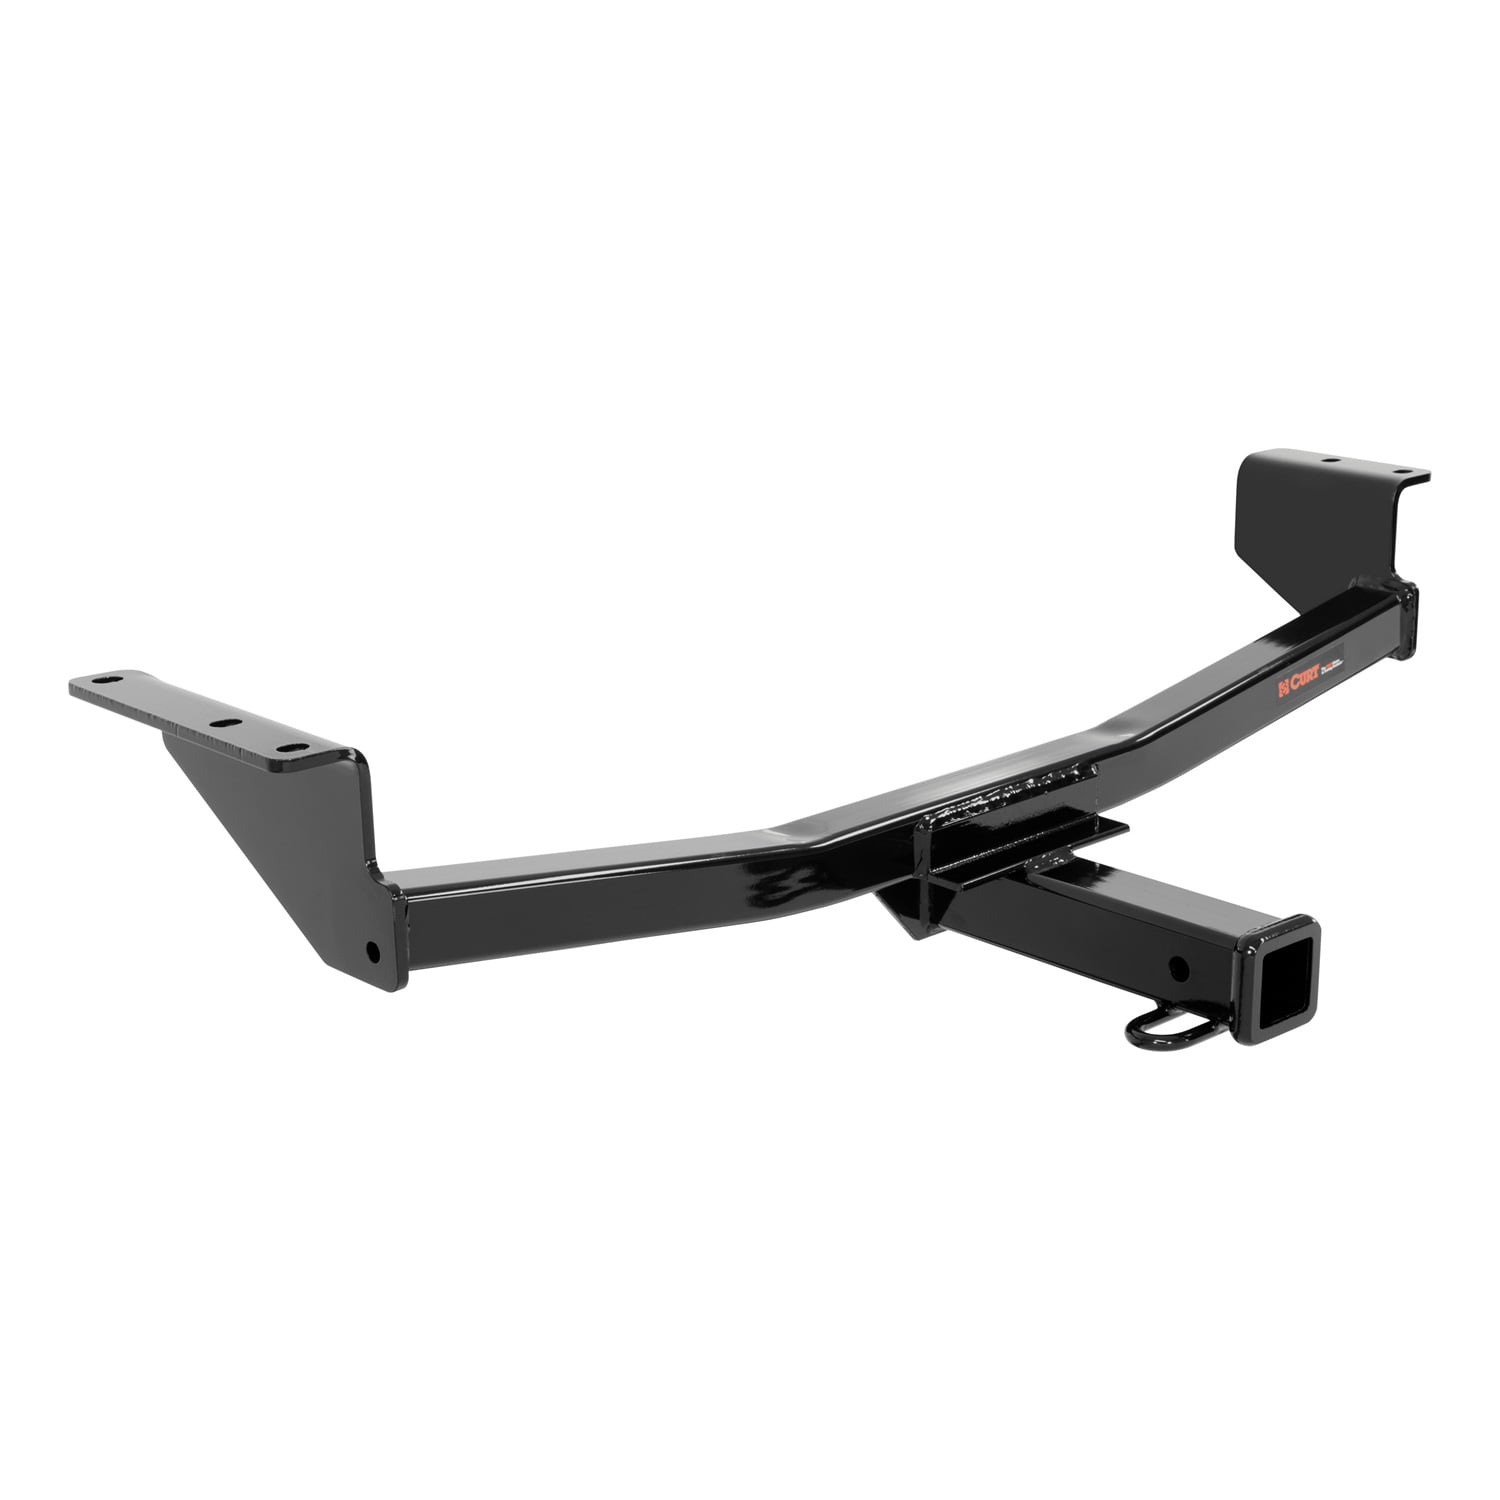 Curt Hitch 13204 Trailer Hitch Rear Class III; Square Tube; 2 Inch Steel Square Tube Telescoping Hitch Package